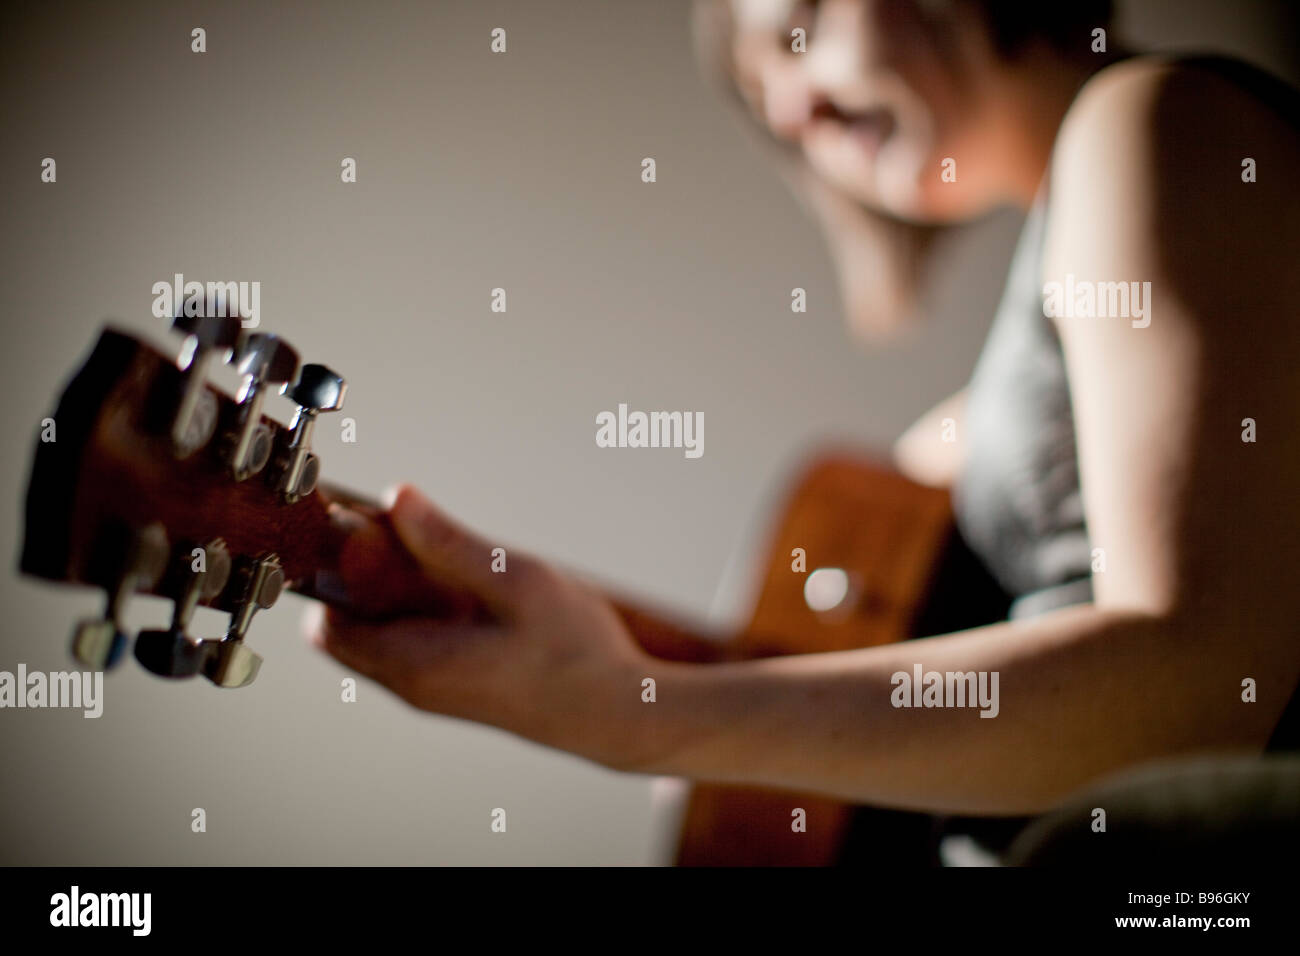 Young woman playing guitar Banque D'Images